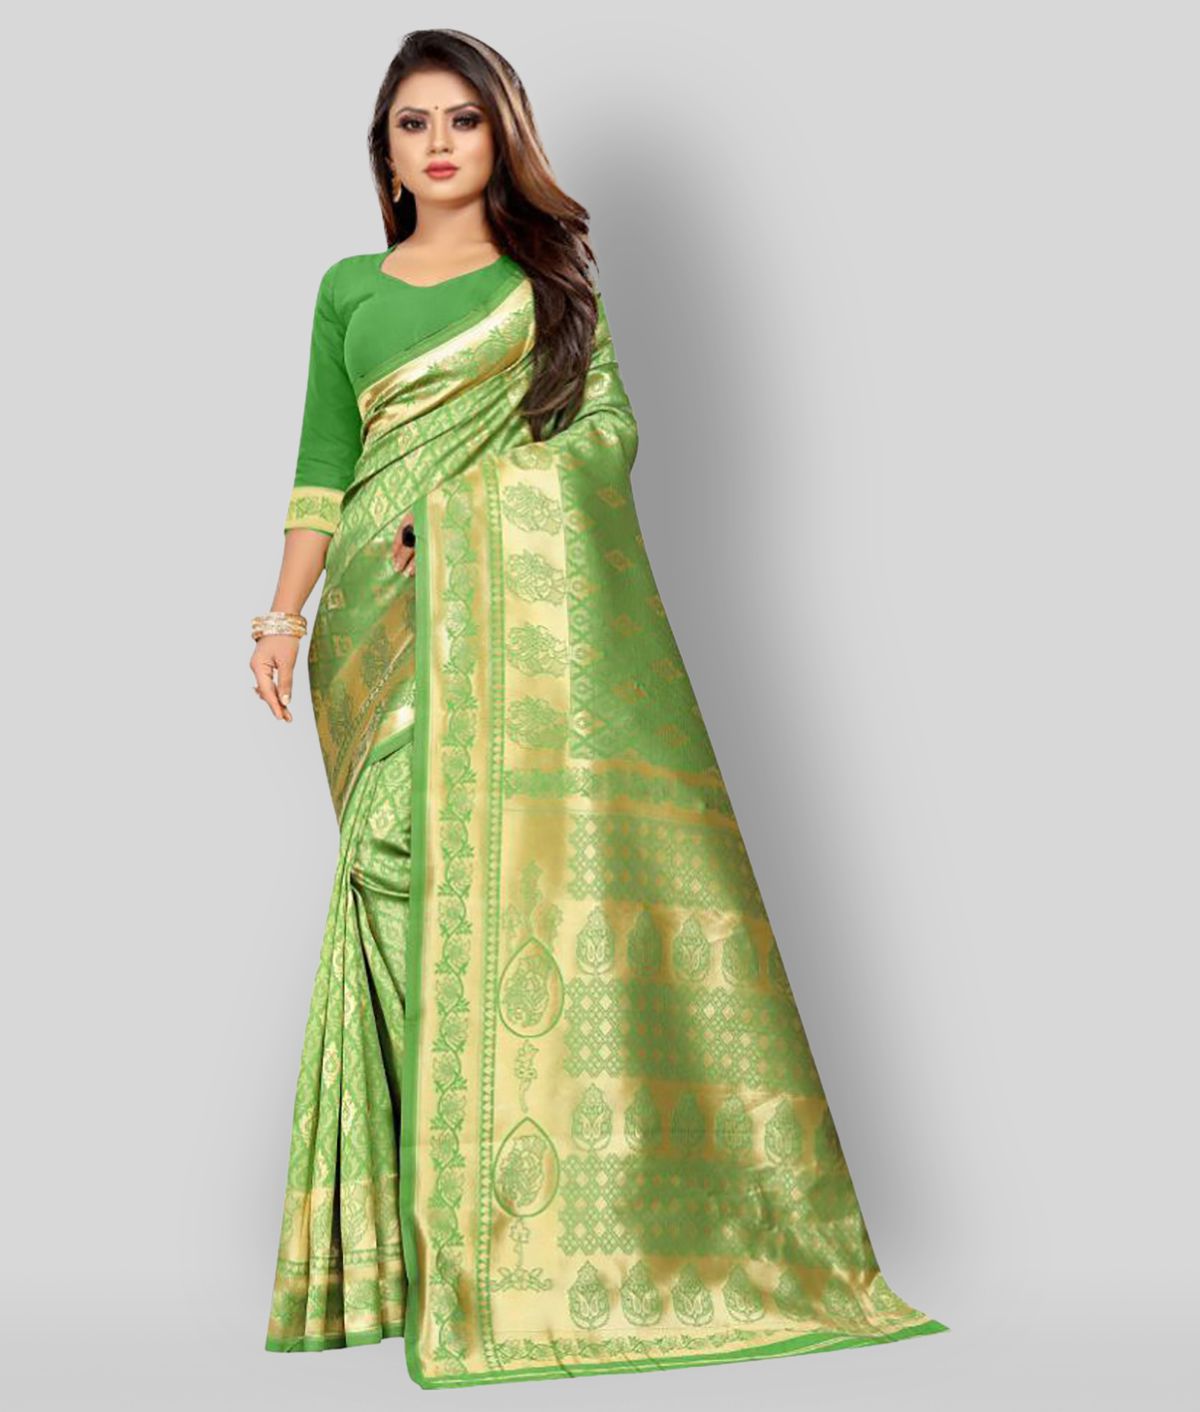     			Gazal Fashions - Green Silk Blend Saree With Blouse Piece ( Pack of 1 )